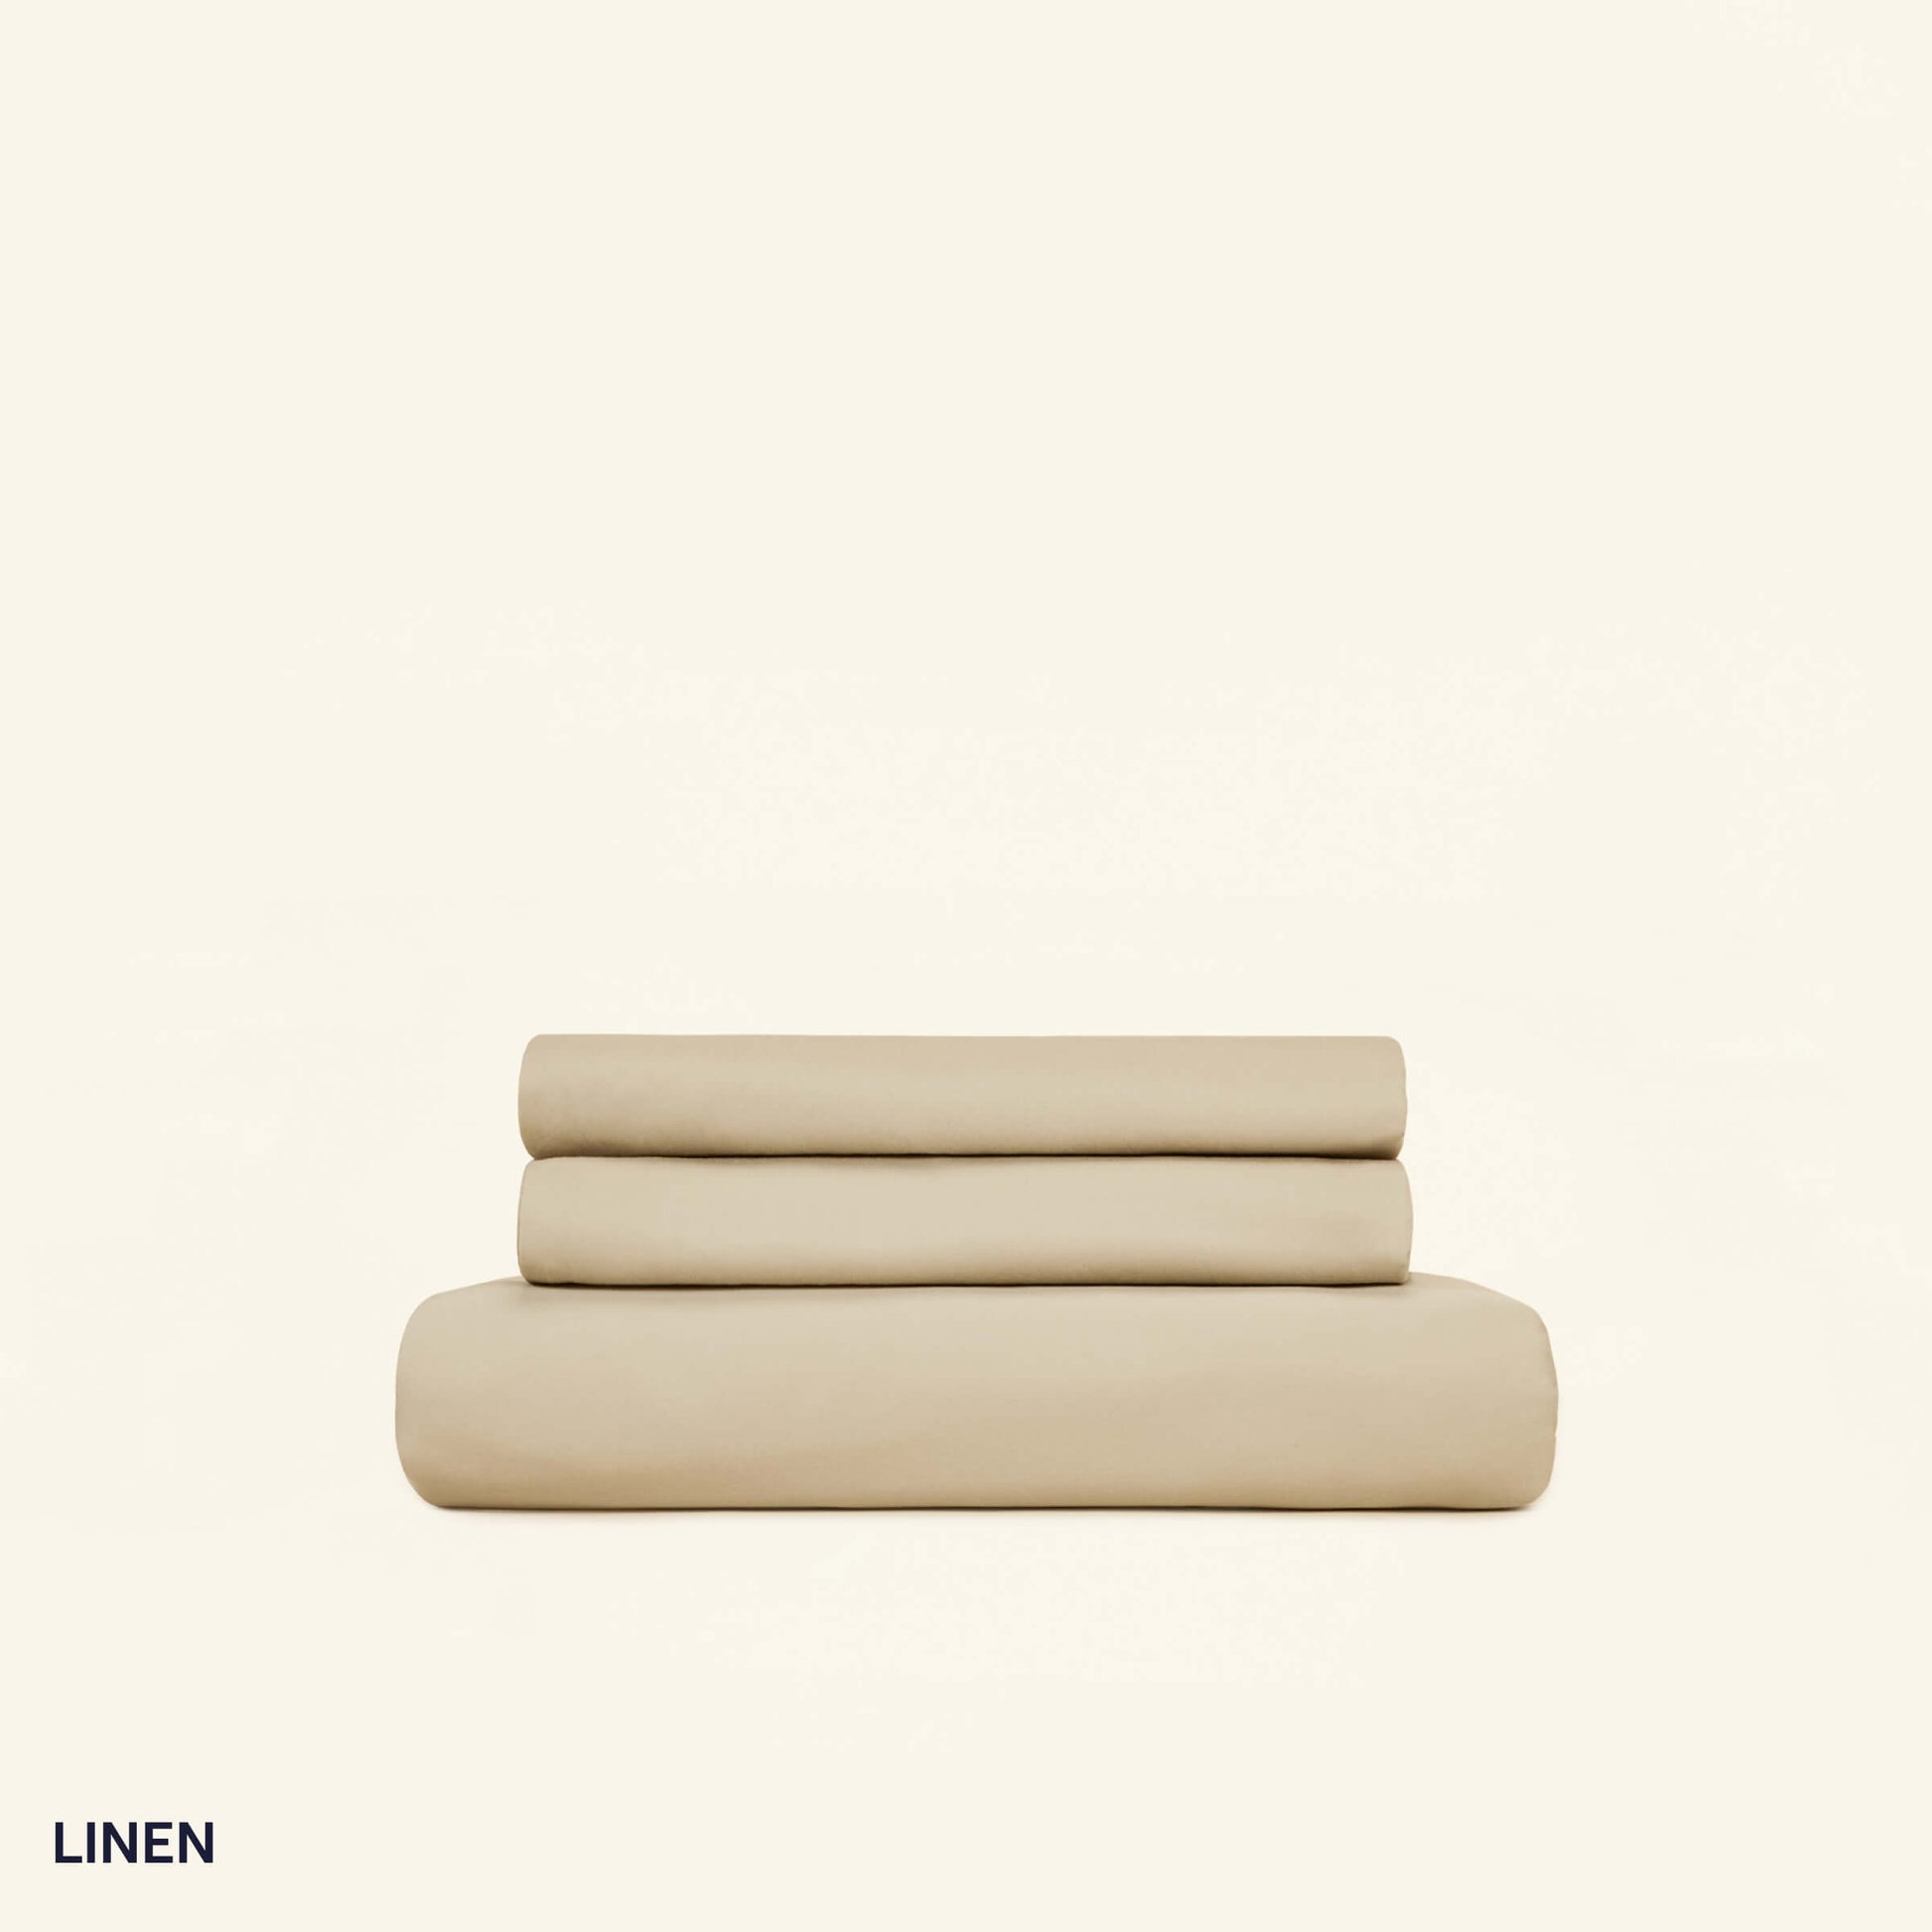 The Slumber Cloud Essential Sheet Set made with temperature regulation technology in linen